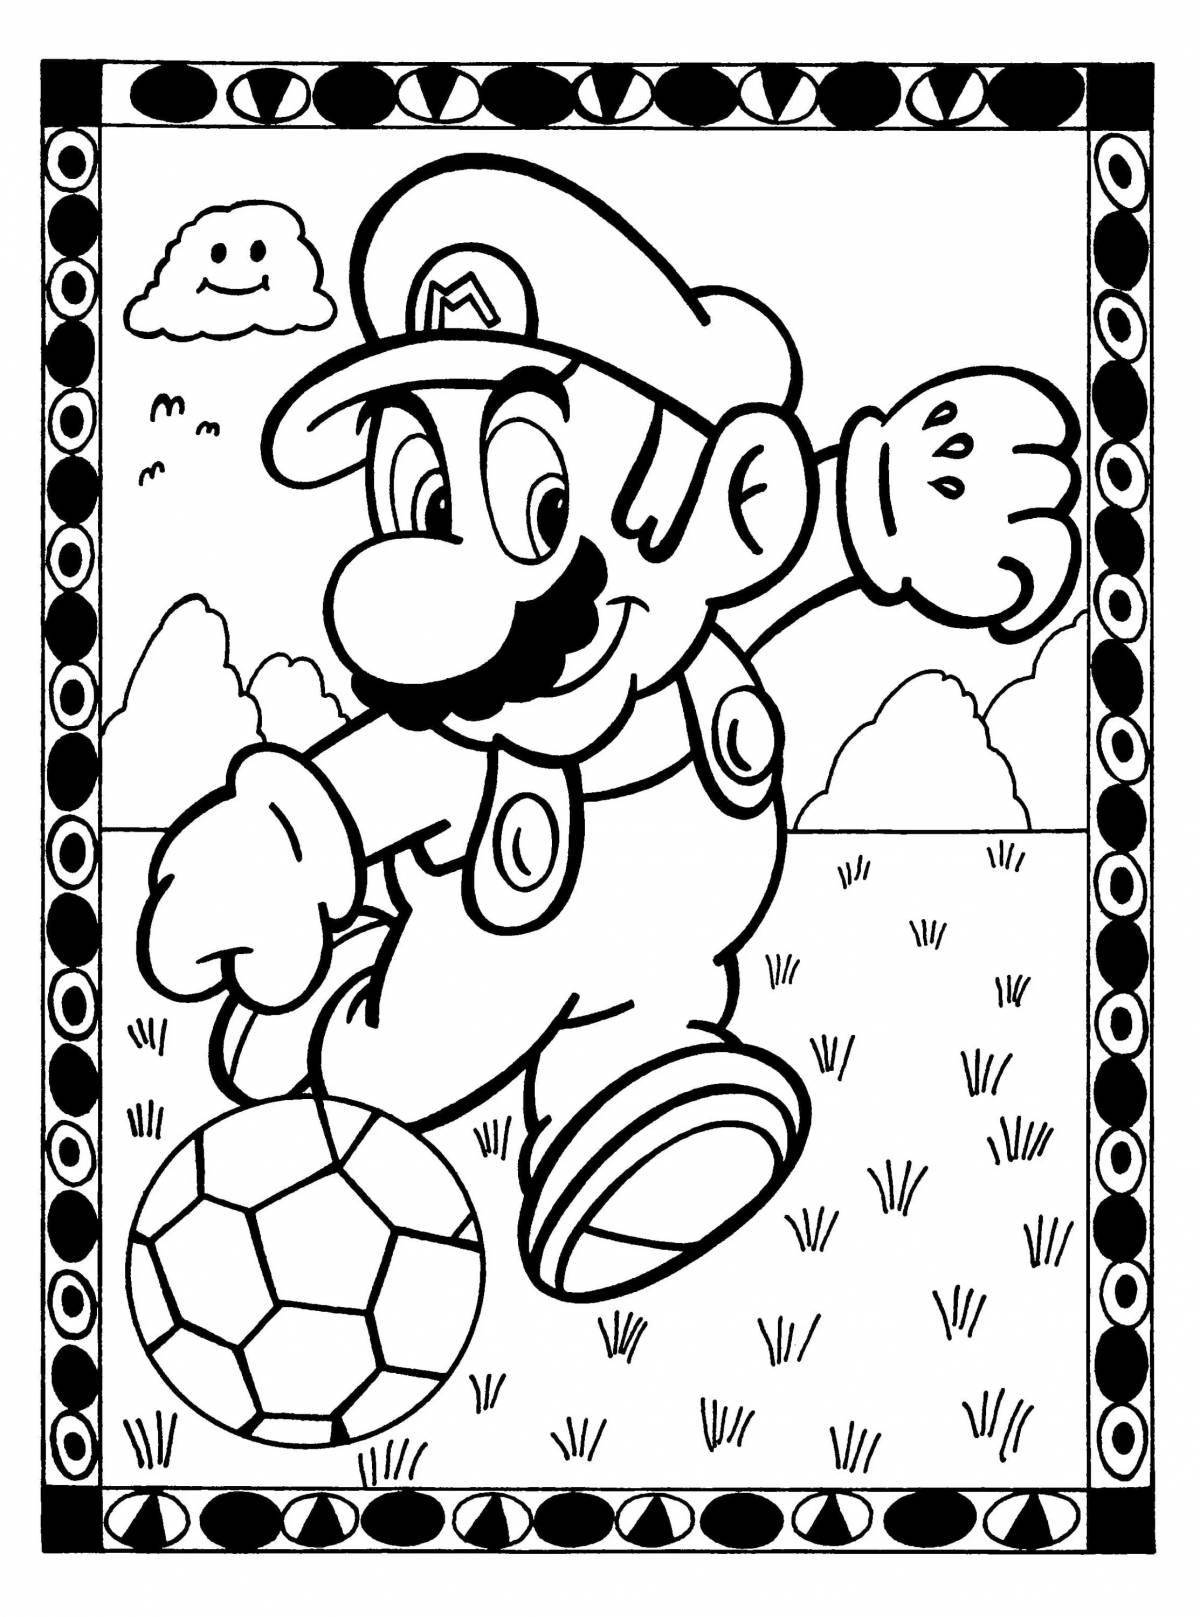 Funny mario coloring book for kids